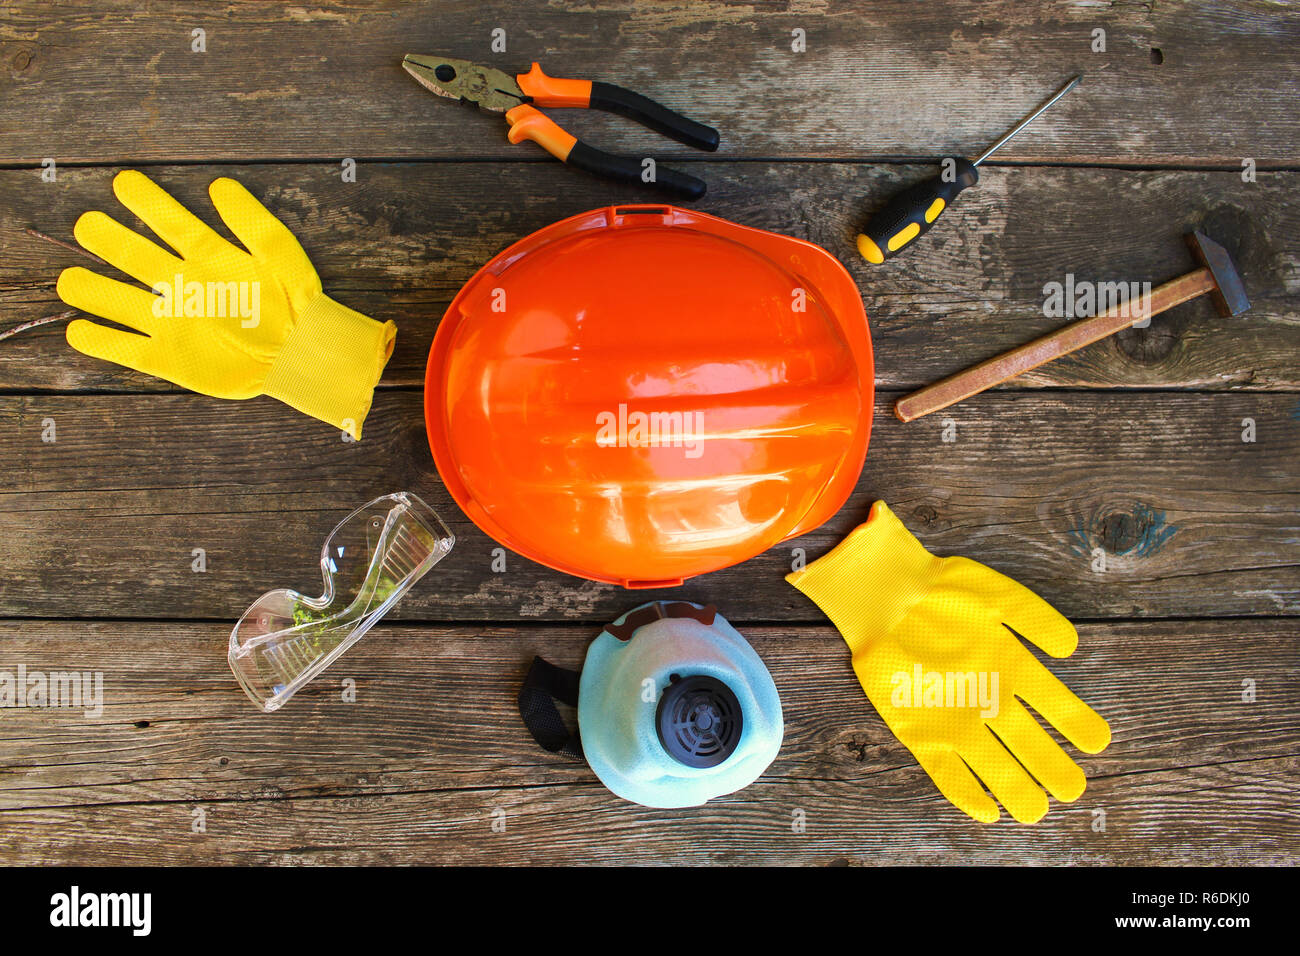 Construction tools and means of protection on an old wooden background. Top view. Flat lay. Stock Photo